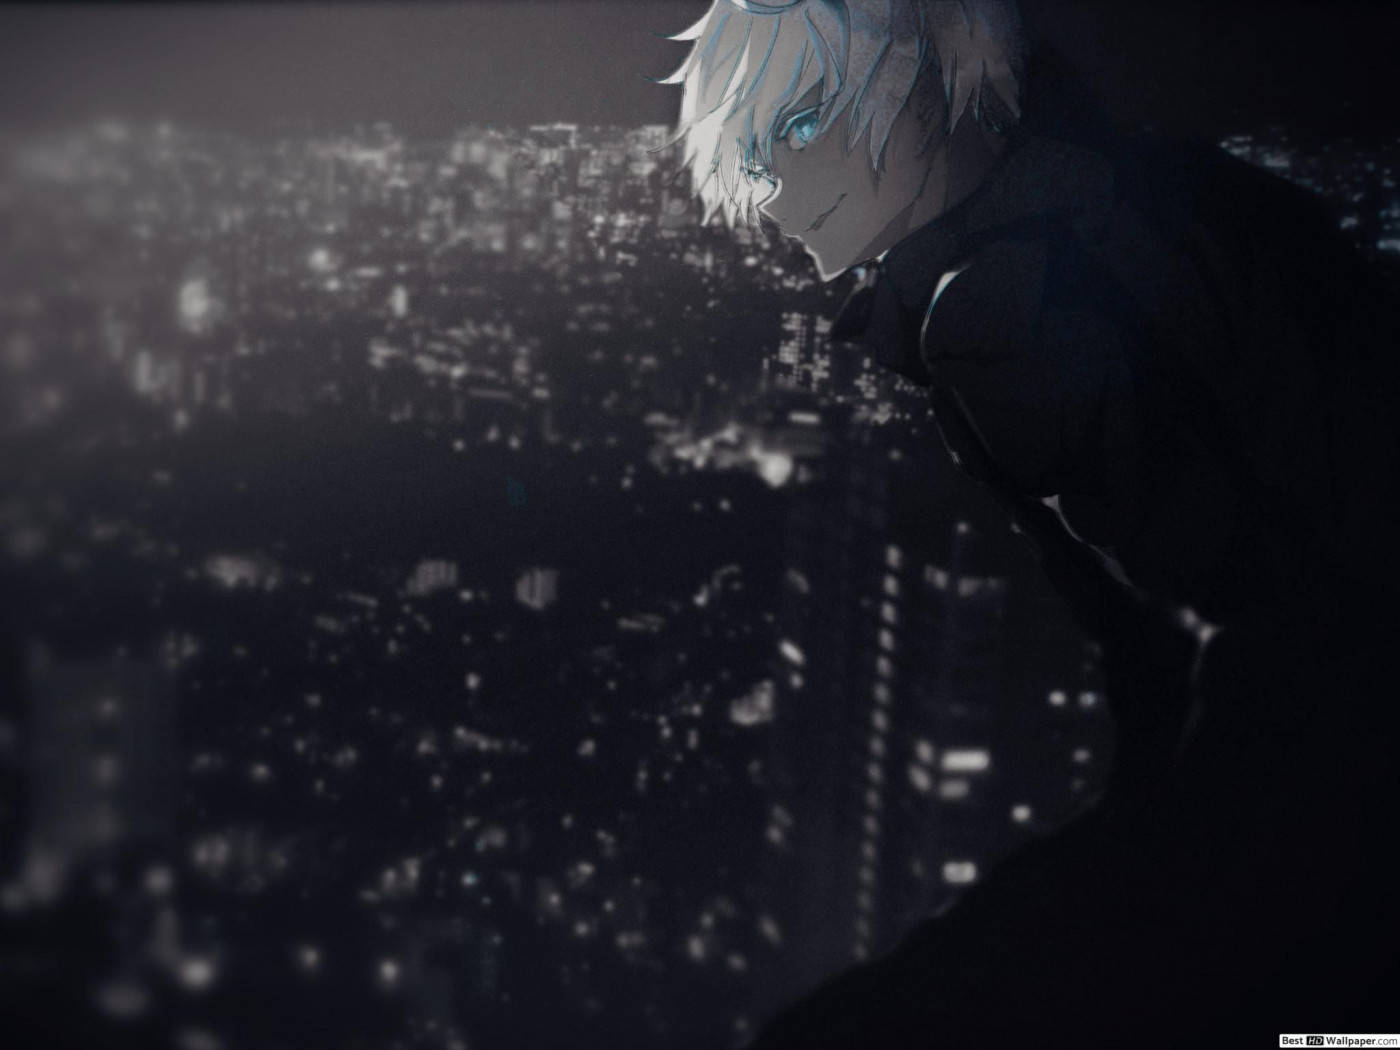 A Character In A Black Outfit Standing In A City Wallpaper